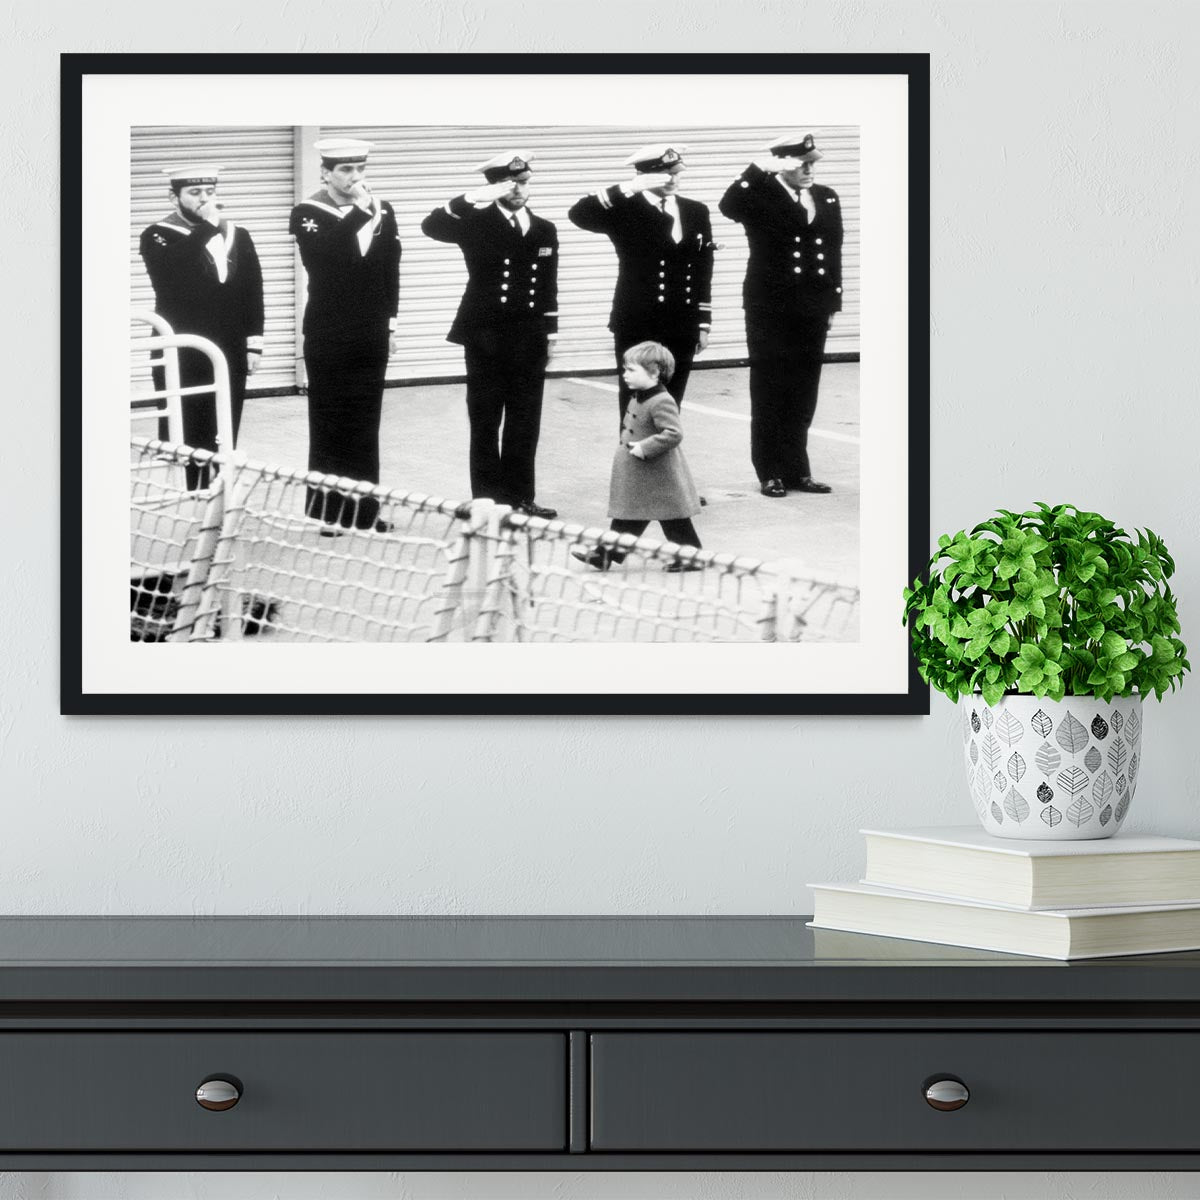 Prince William visiting the Royal Navy as a small child Framed Print - Canvas Art Rocks - 1